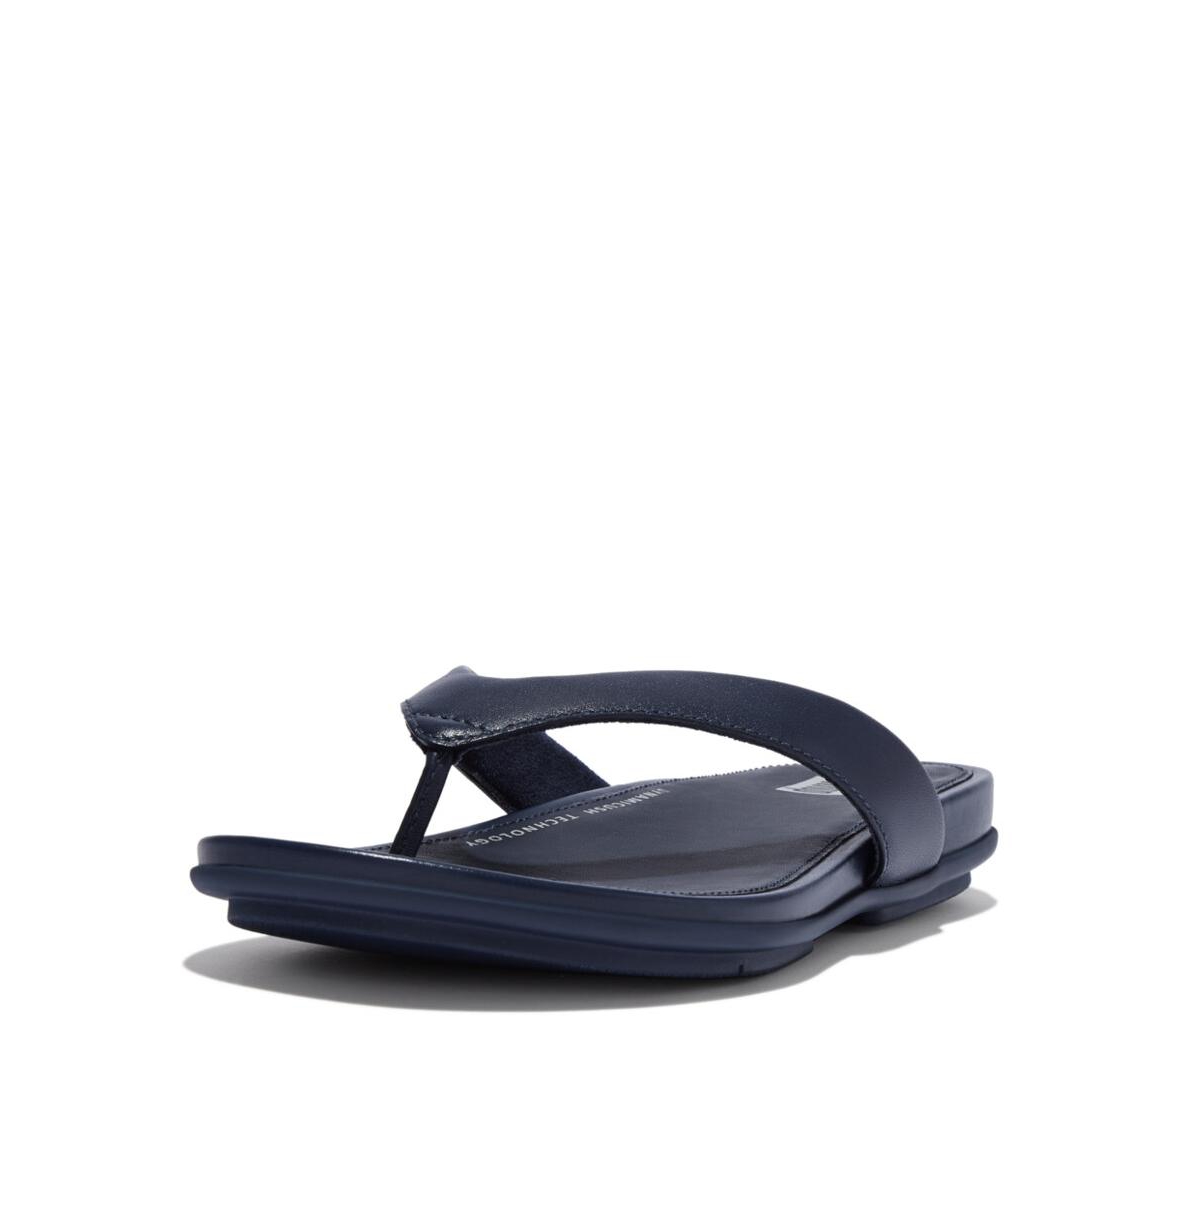 FitFlop Women's Gracie Toe-Thong Sandals Women's Shoes